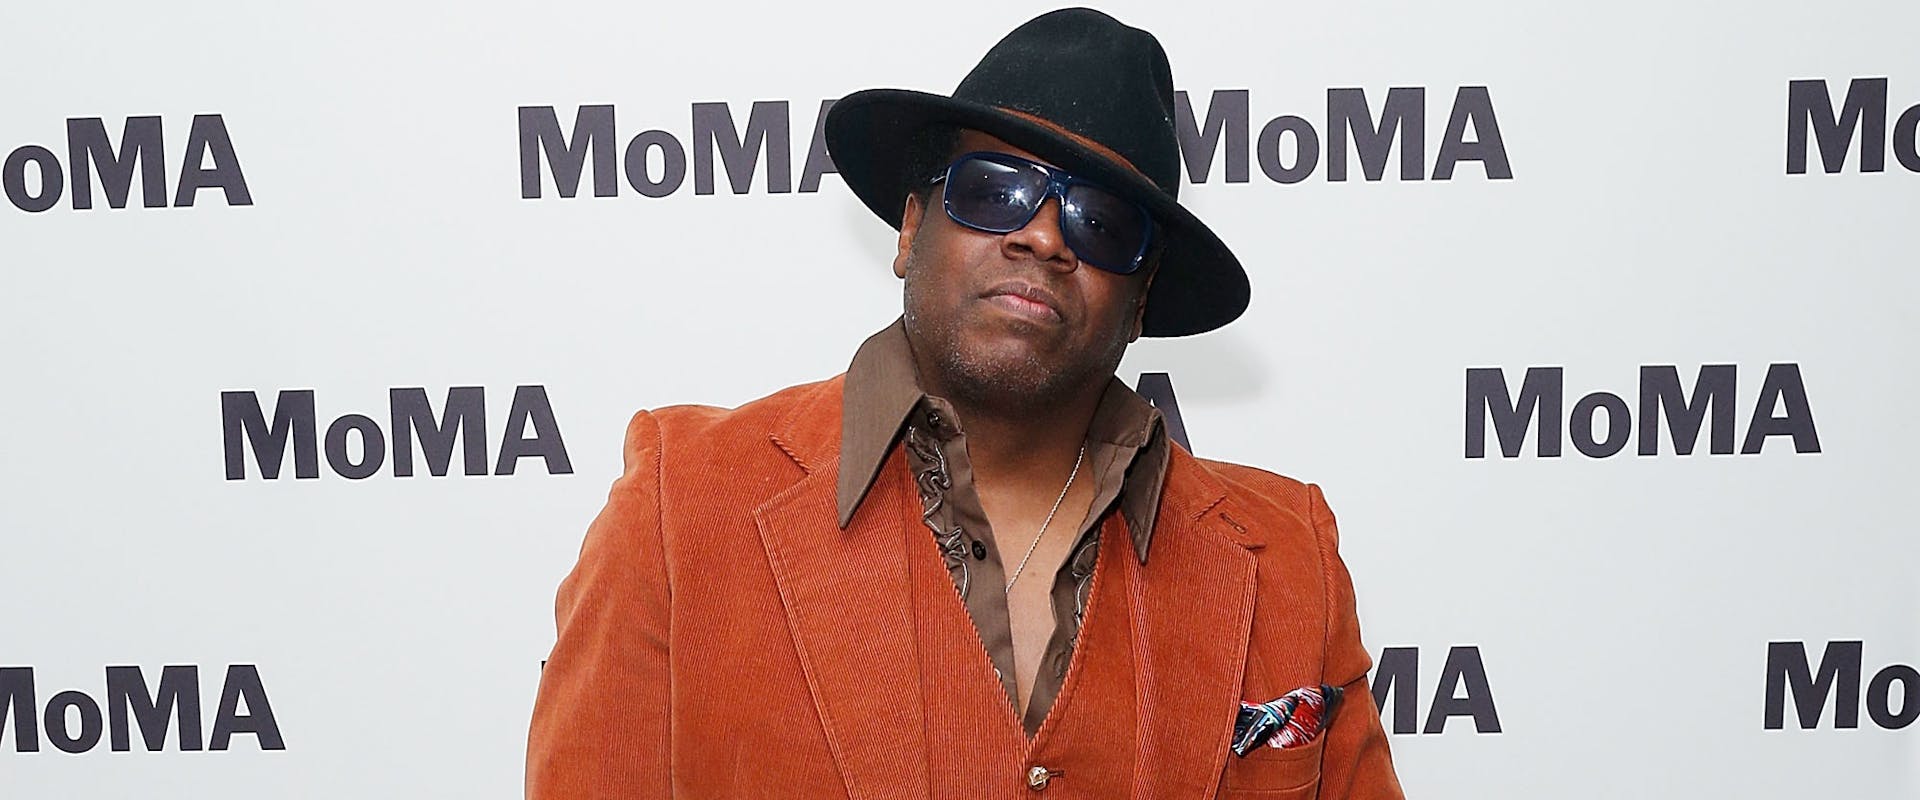 Schoolly D attends the opening night of the MoMA film series, "Abel Ferrara Unlimited" at MoMA on May 1, 2019 in New York City